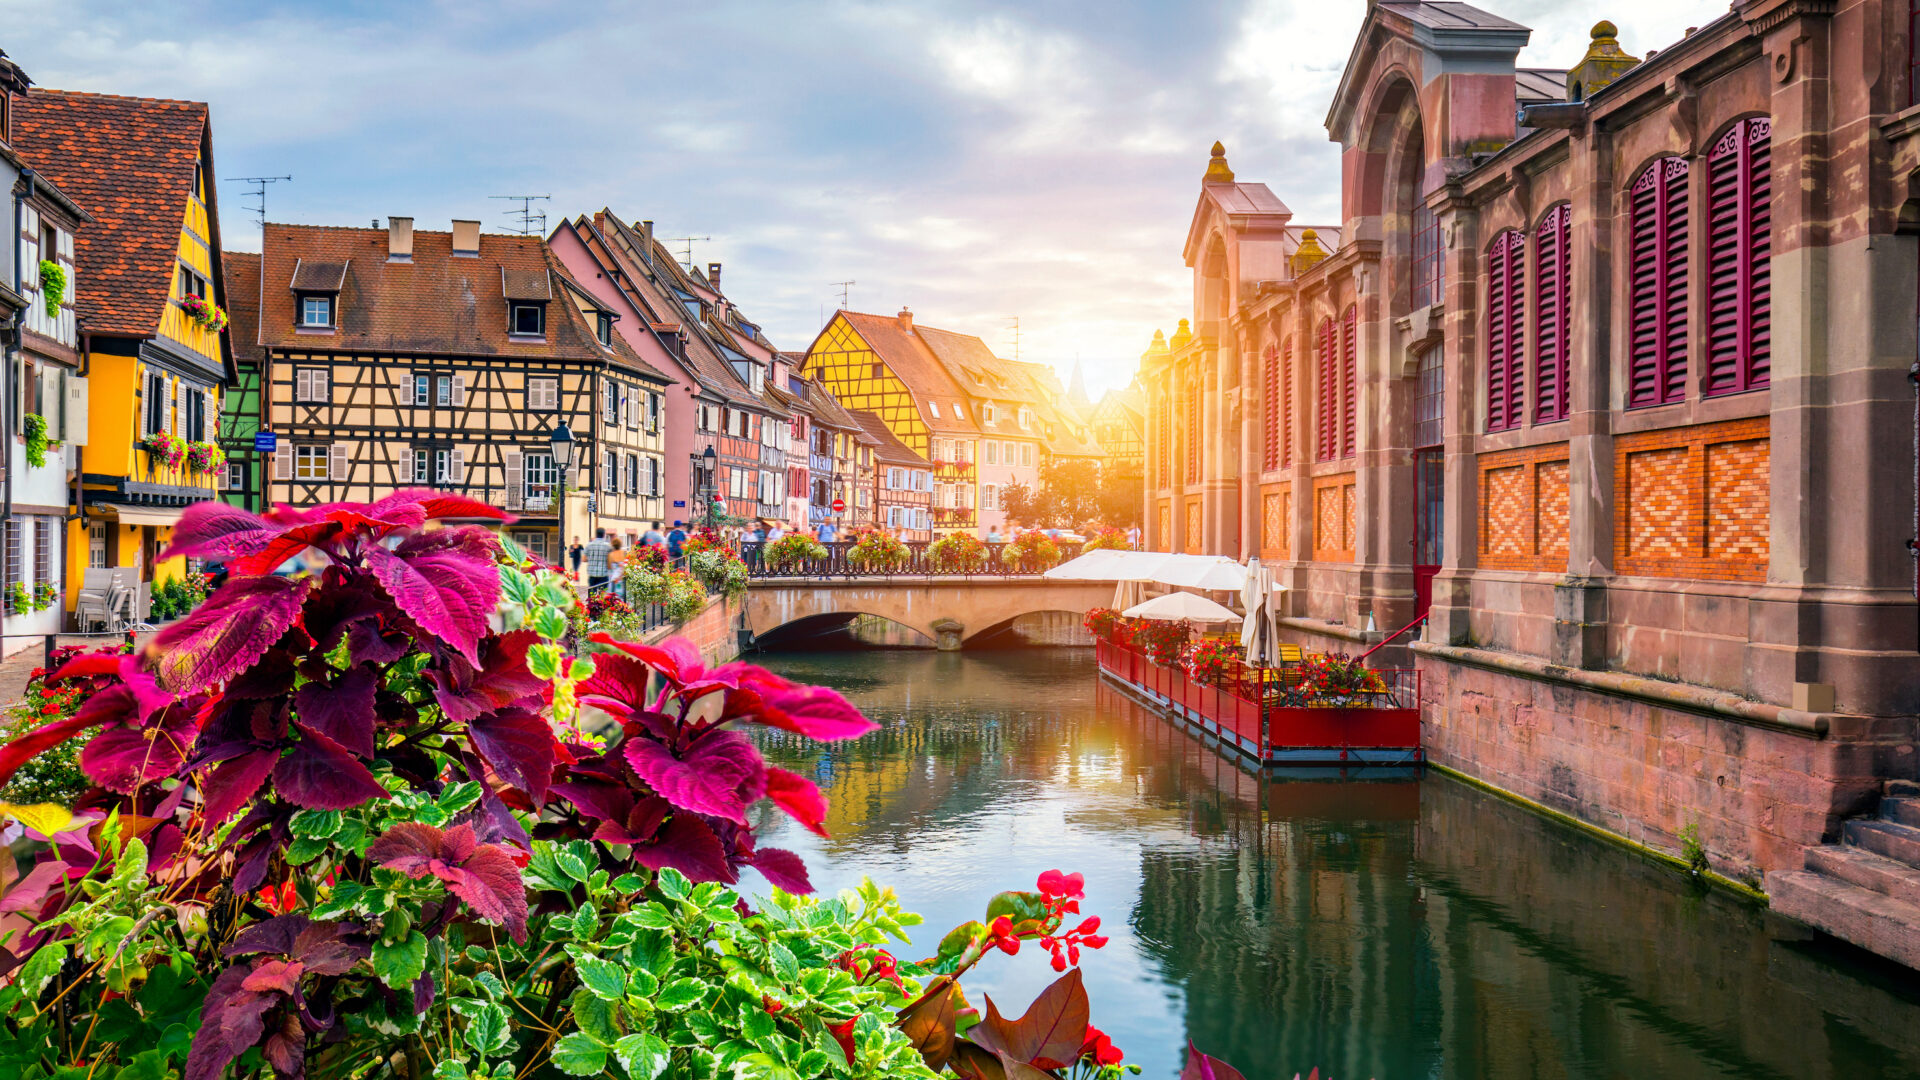 Colmar is a charming little town in the heart of Alsace